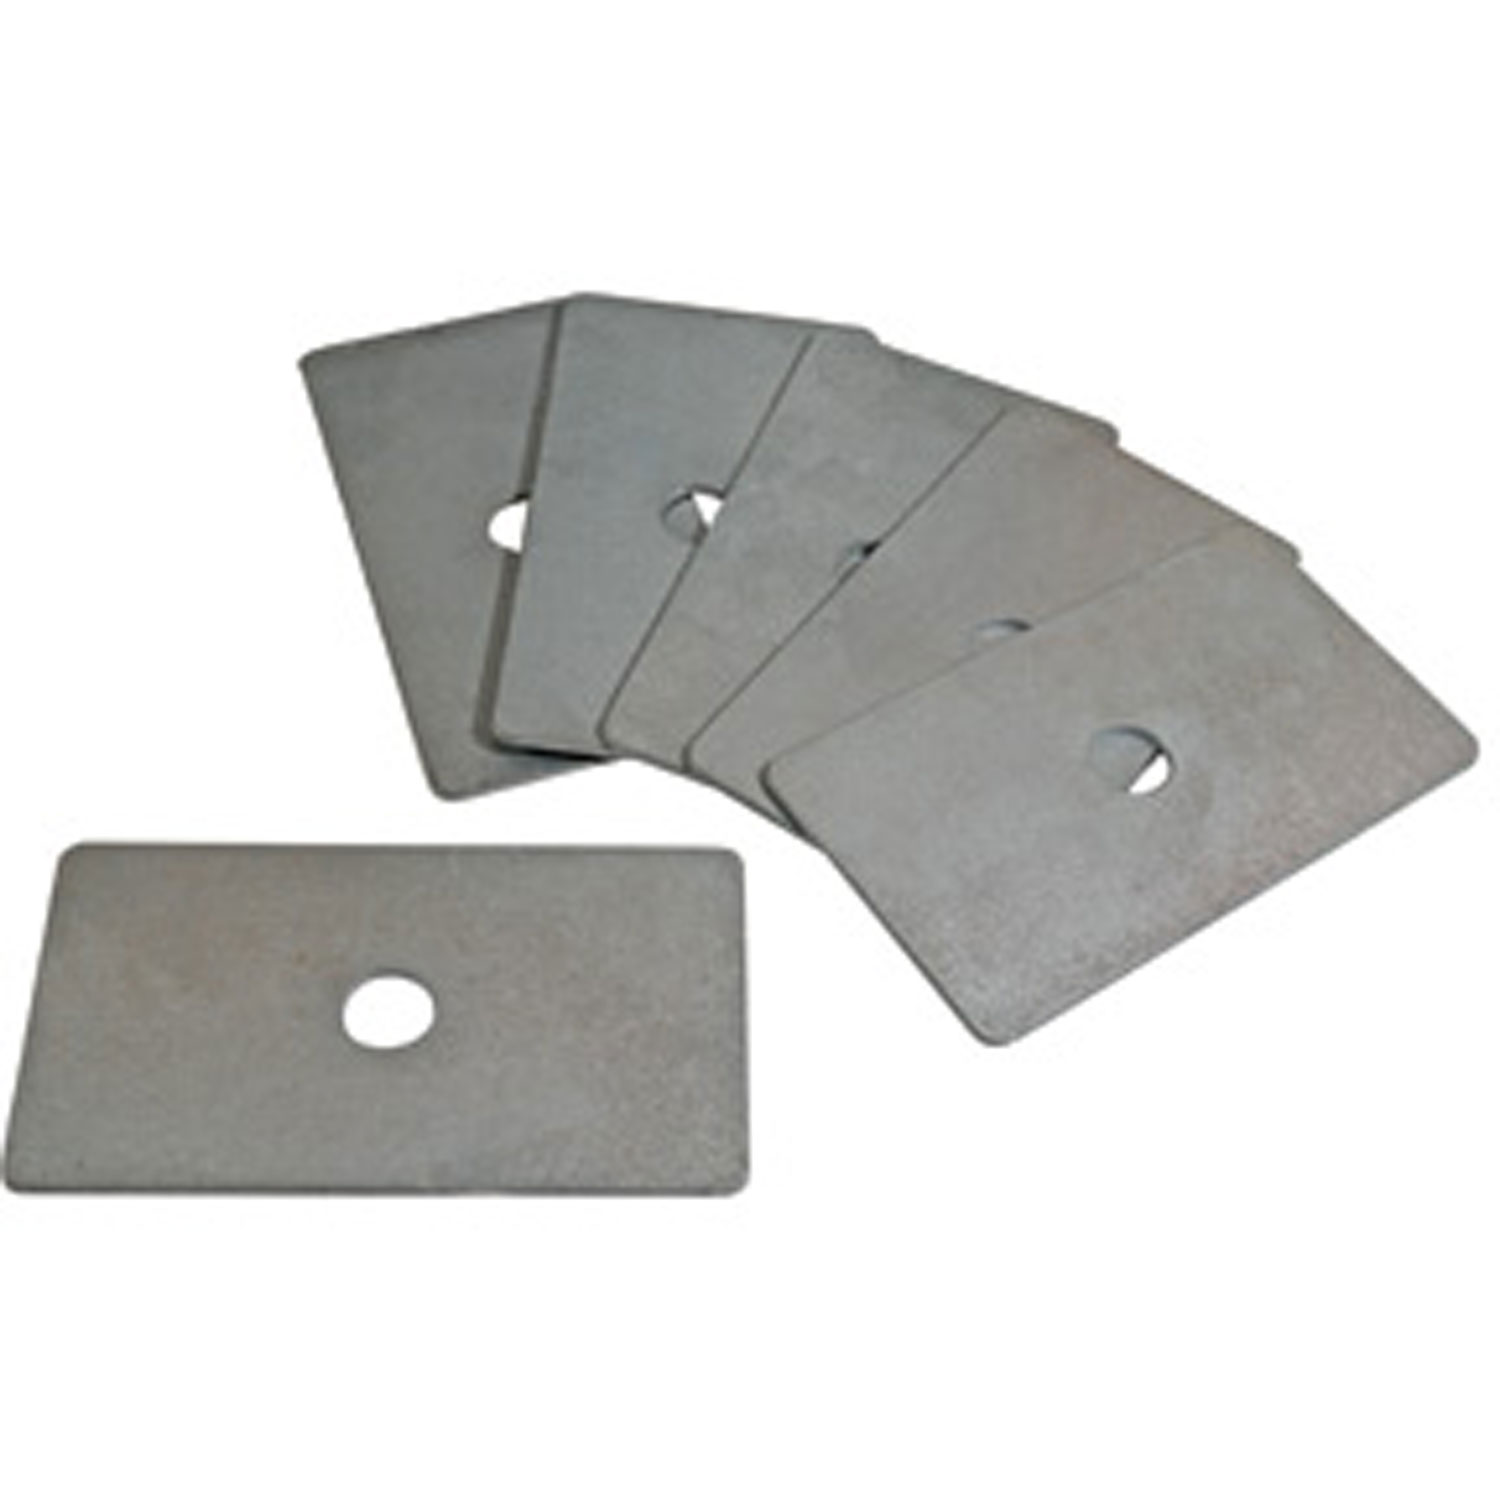 3.5 HD SUPPORT PLATE 6